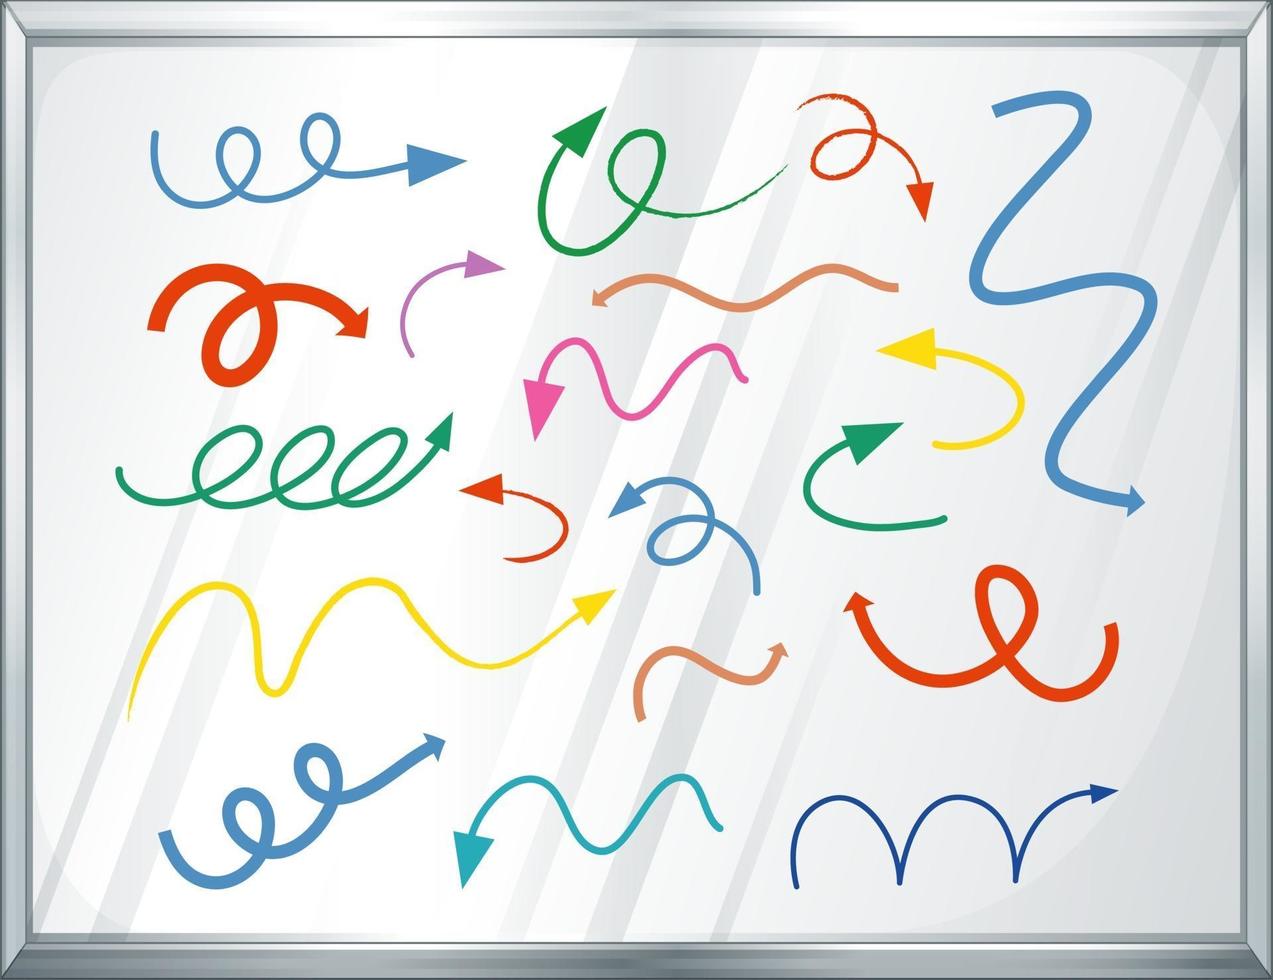 Different types of hand drawn curved arrows on white board vector